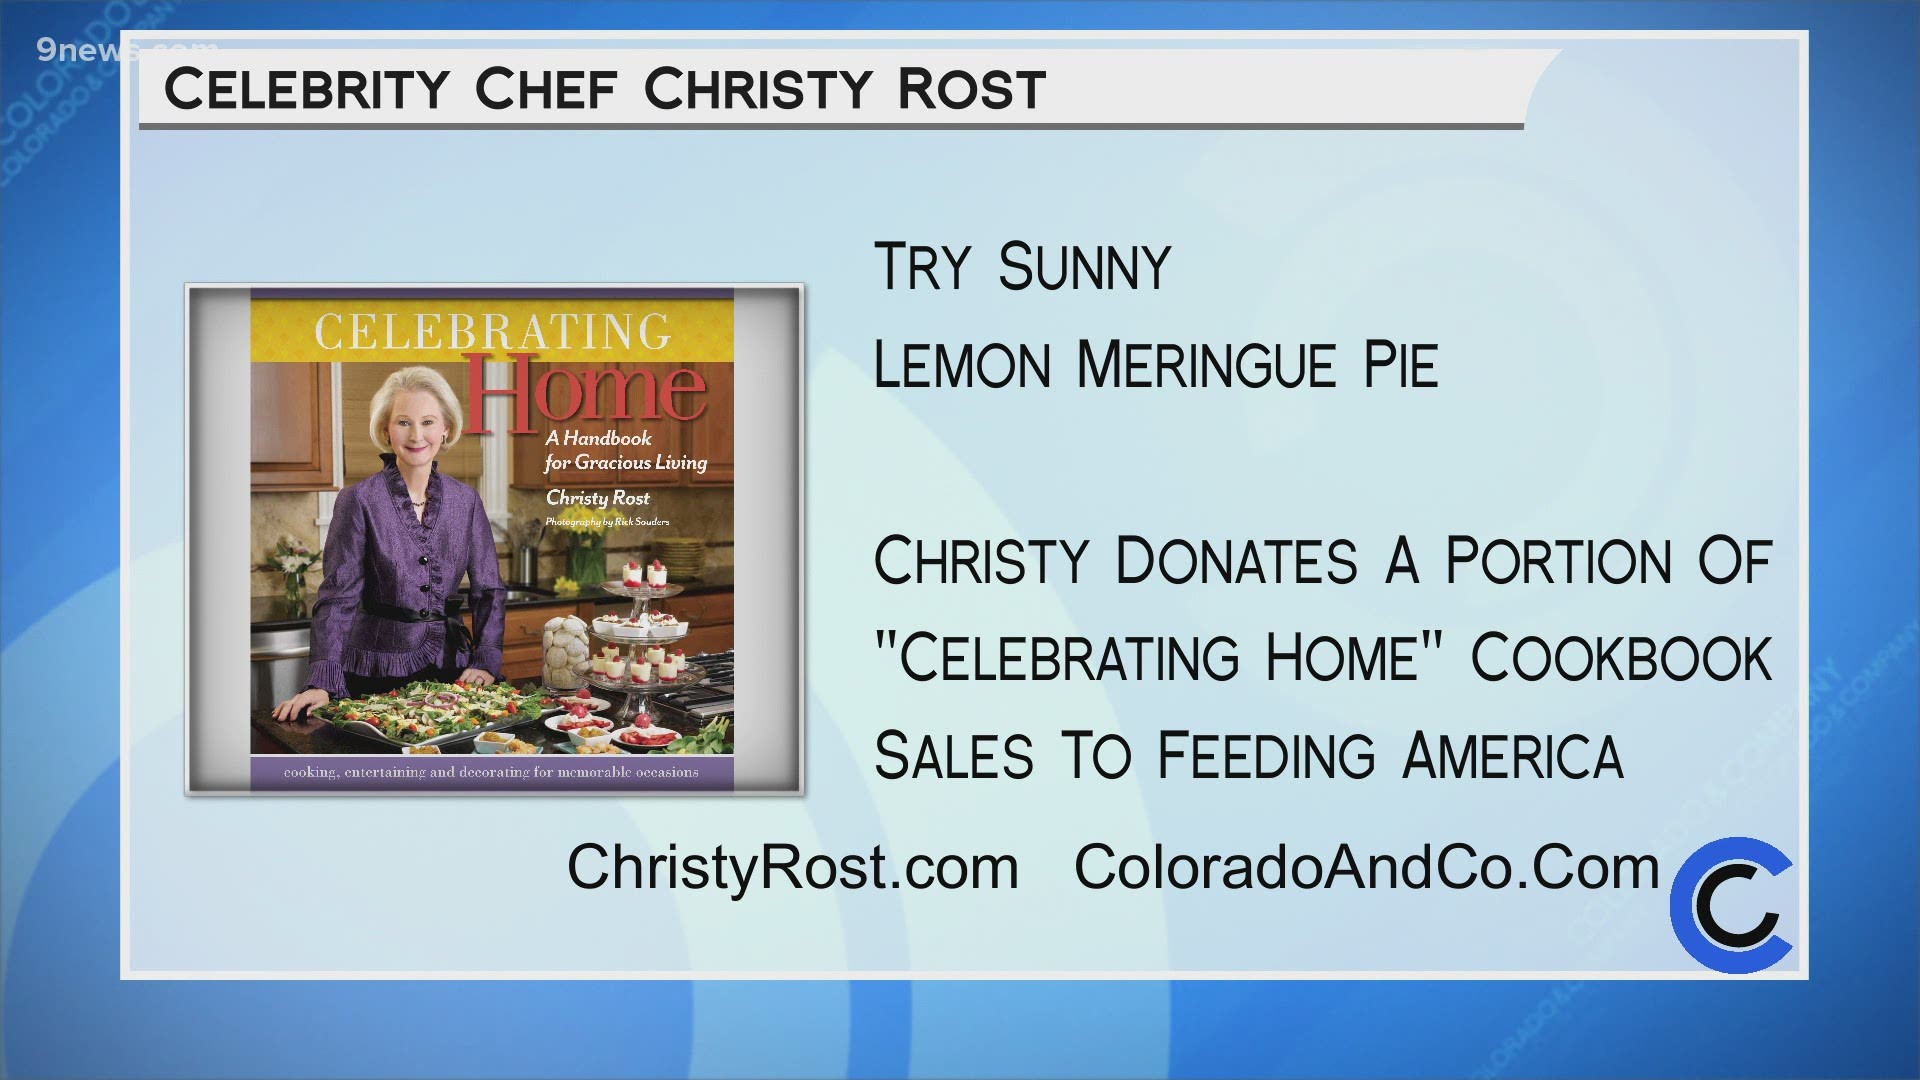 Get this recipe and a ton of other awesome ones in Christy's "Celebrating Home" cookbook. Learn more at ChristyRost.com.